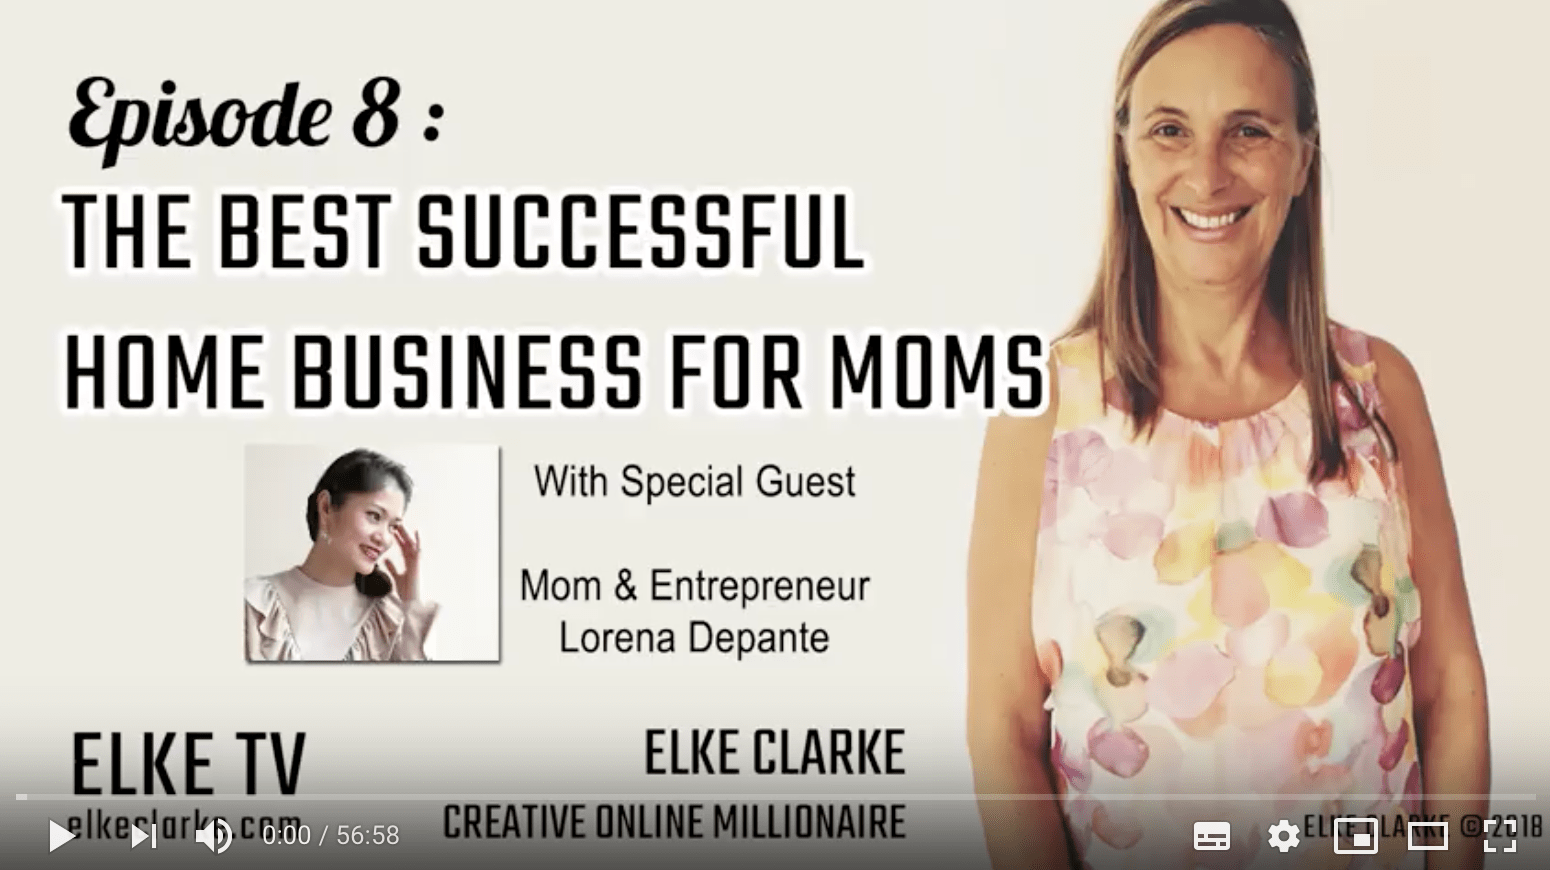 The Best Successful Home Business for Moms. Elke Clarke's Interview Mom and Zazzle Entrepreneur, Lorena Depante